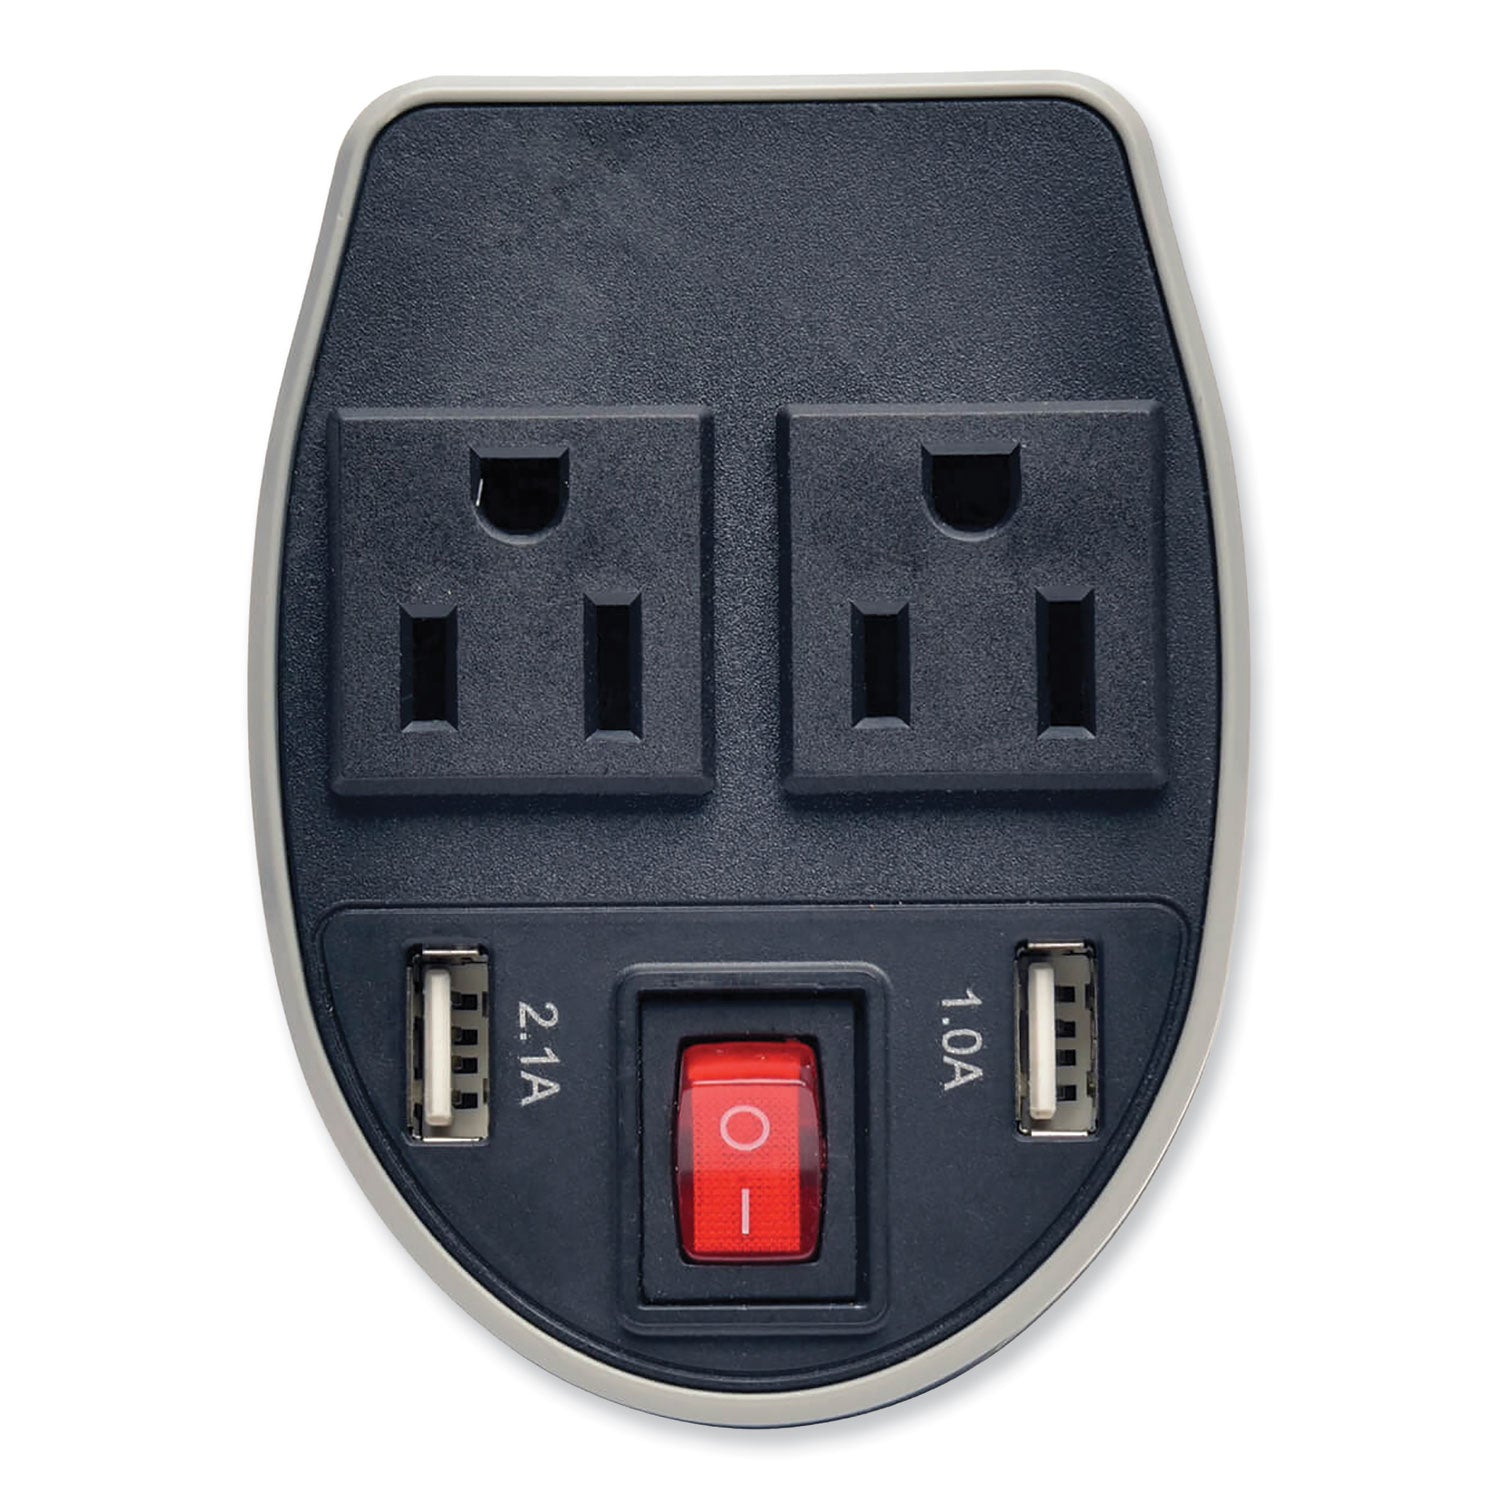 powerverter-ultra-compact-car-inverter-200-w-two-ac-outlets-two-usb-ports_trppv200cusb - 5